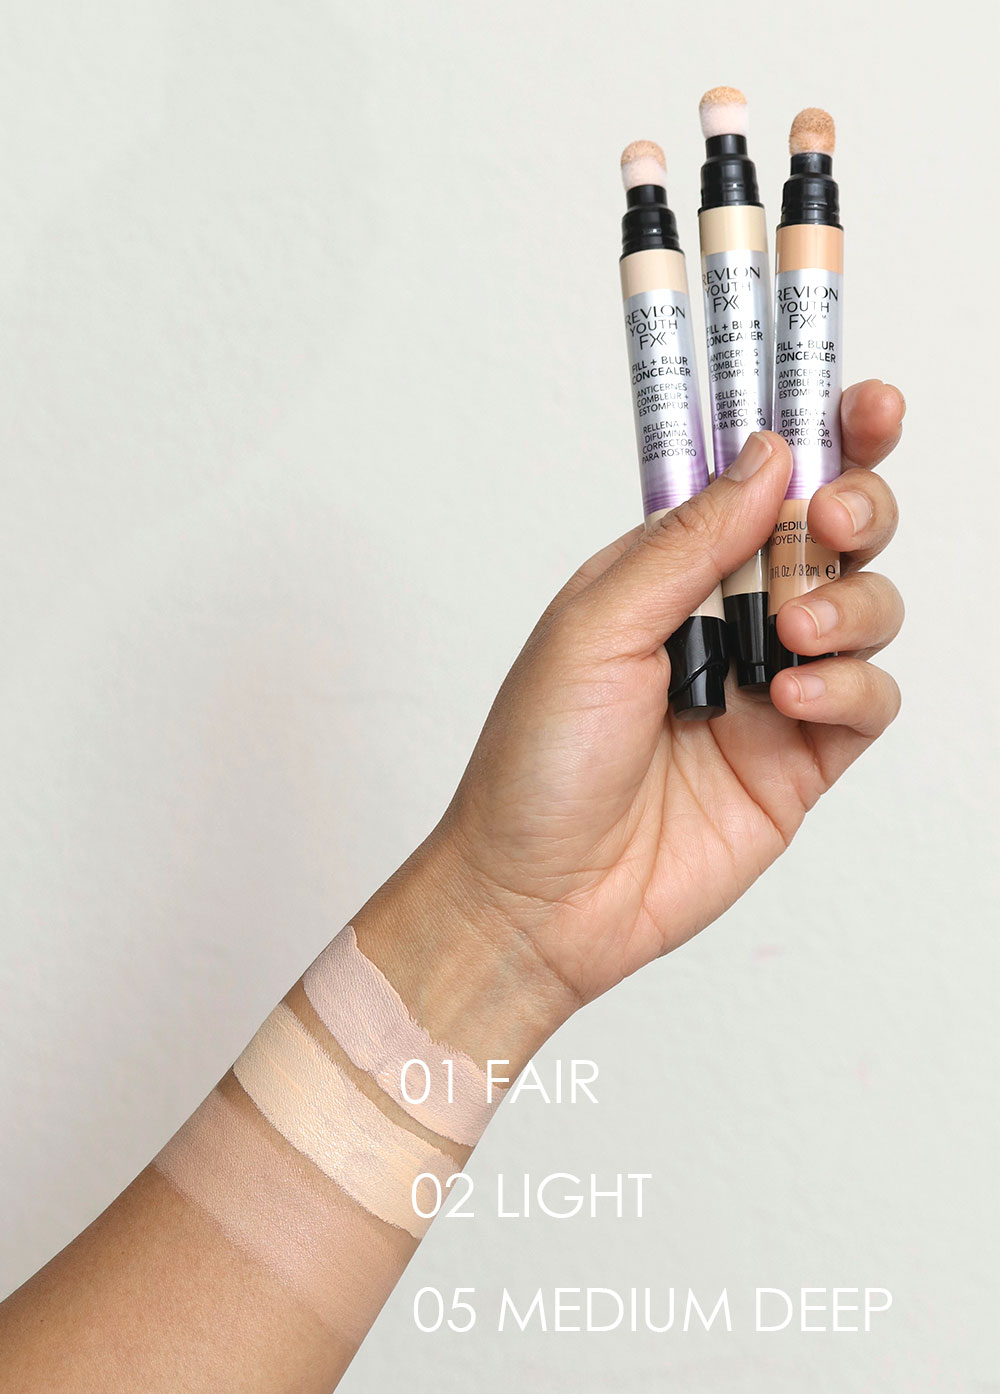 Revlon Youth FX Fill + Blur Concealer Gets Some Things Right and Couple - and Beauty Blog